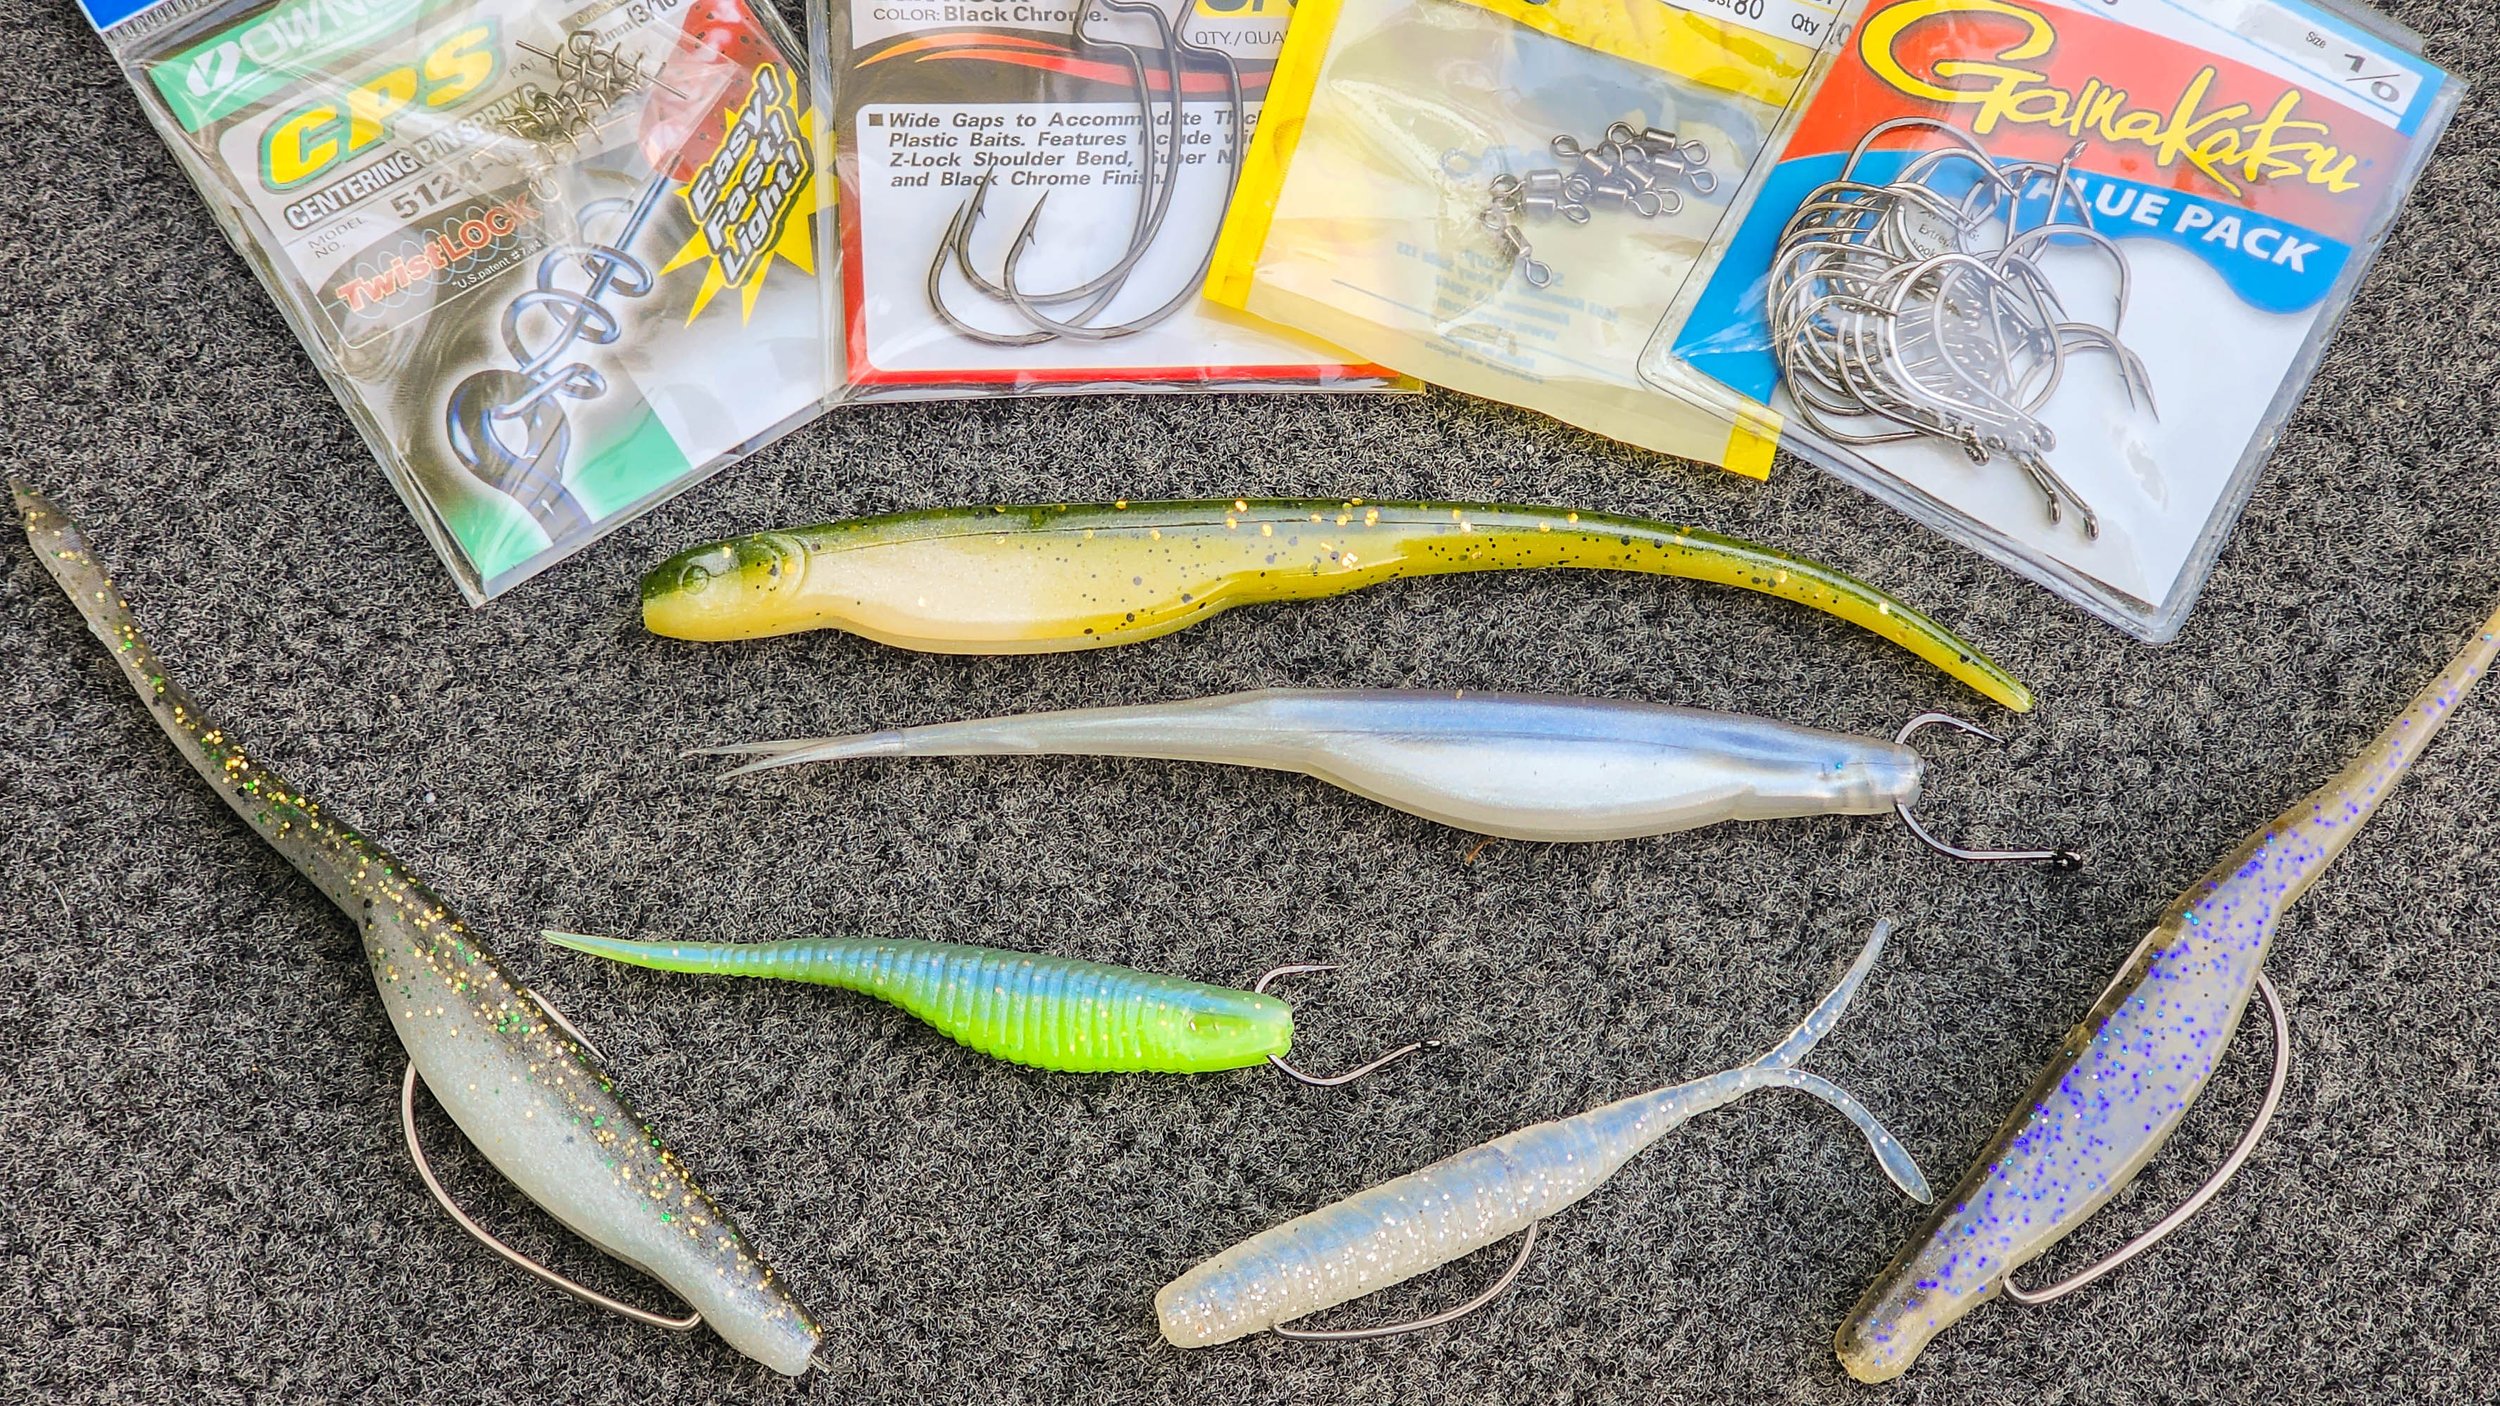 How To Rig And Fish a Night Stick Worm 